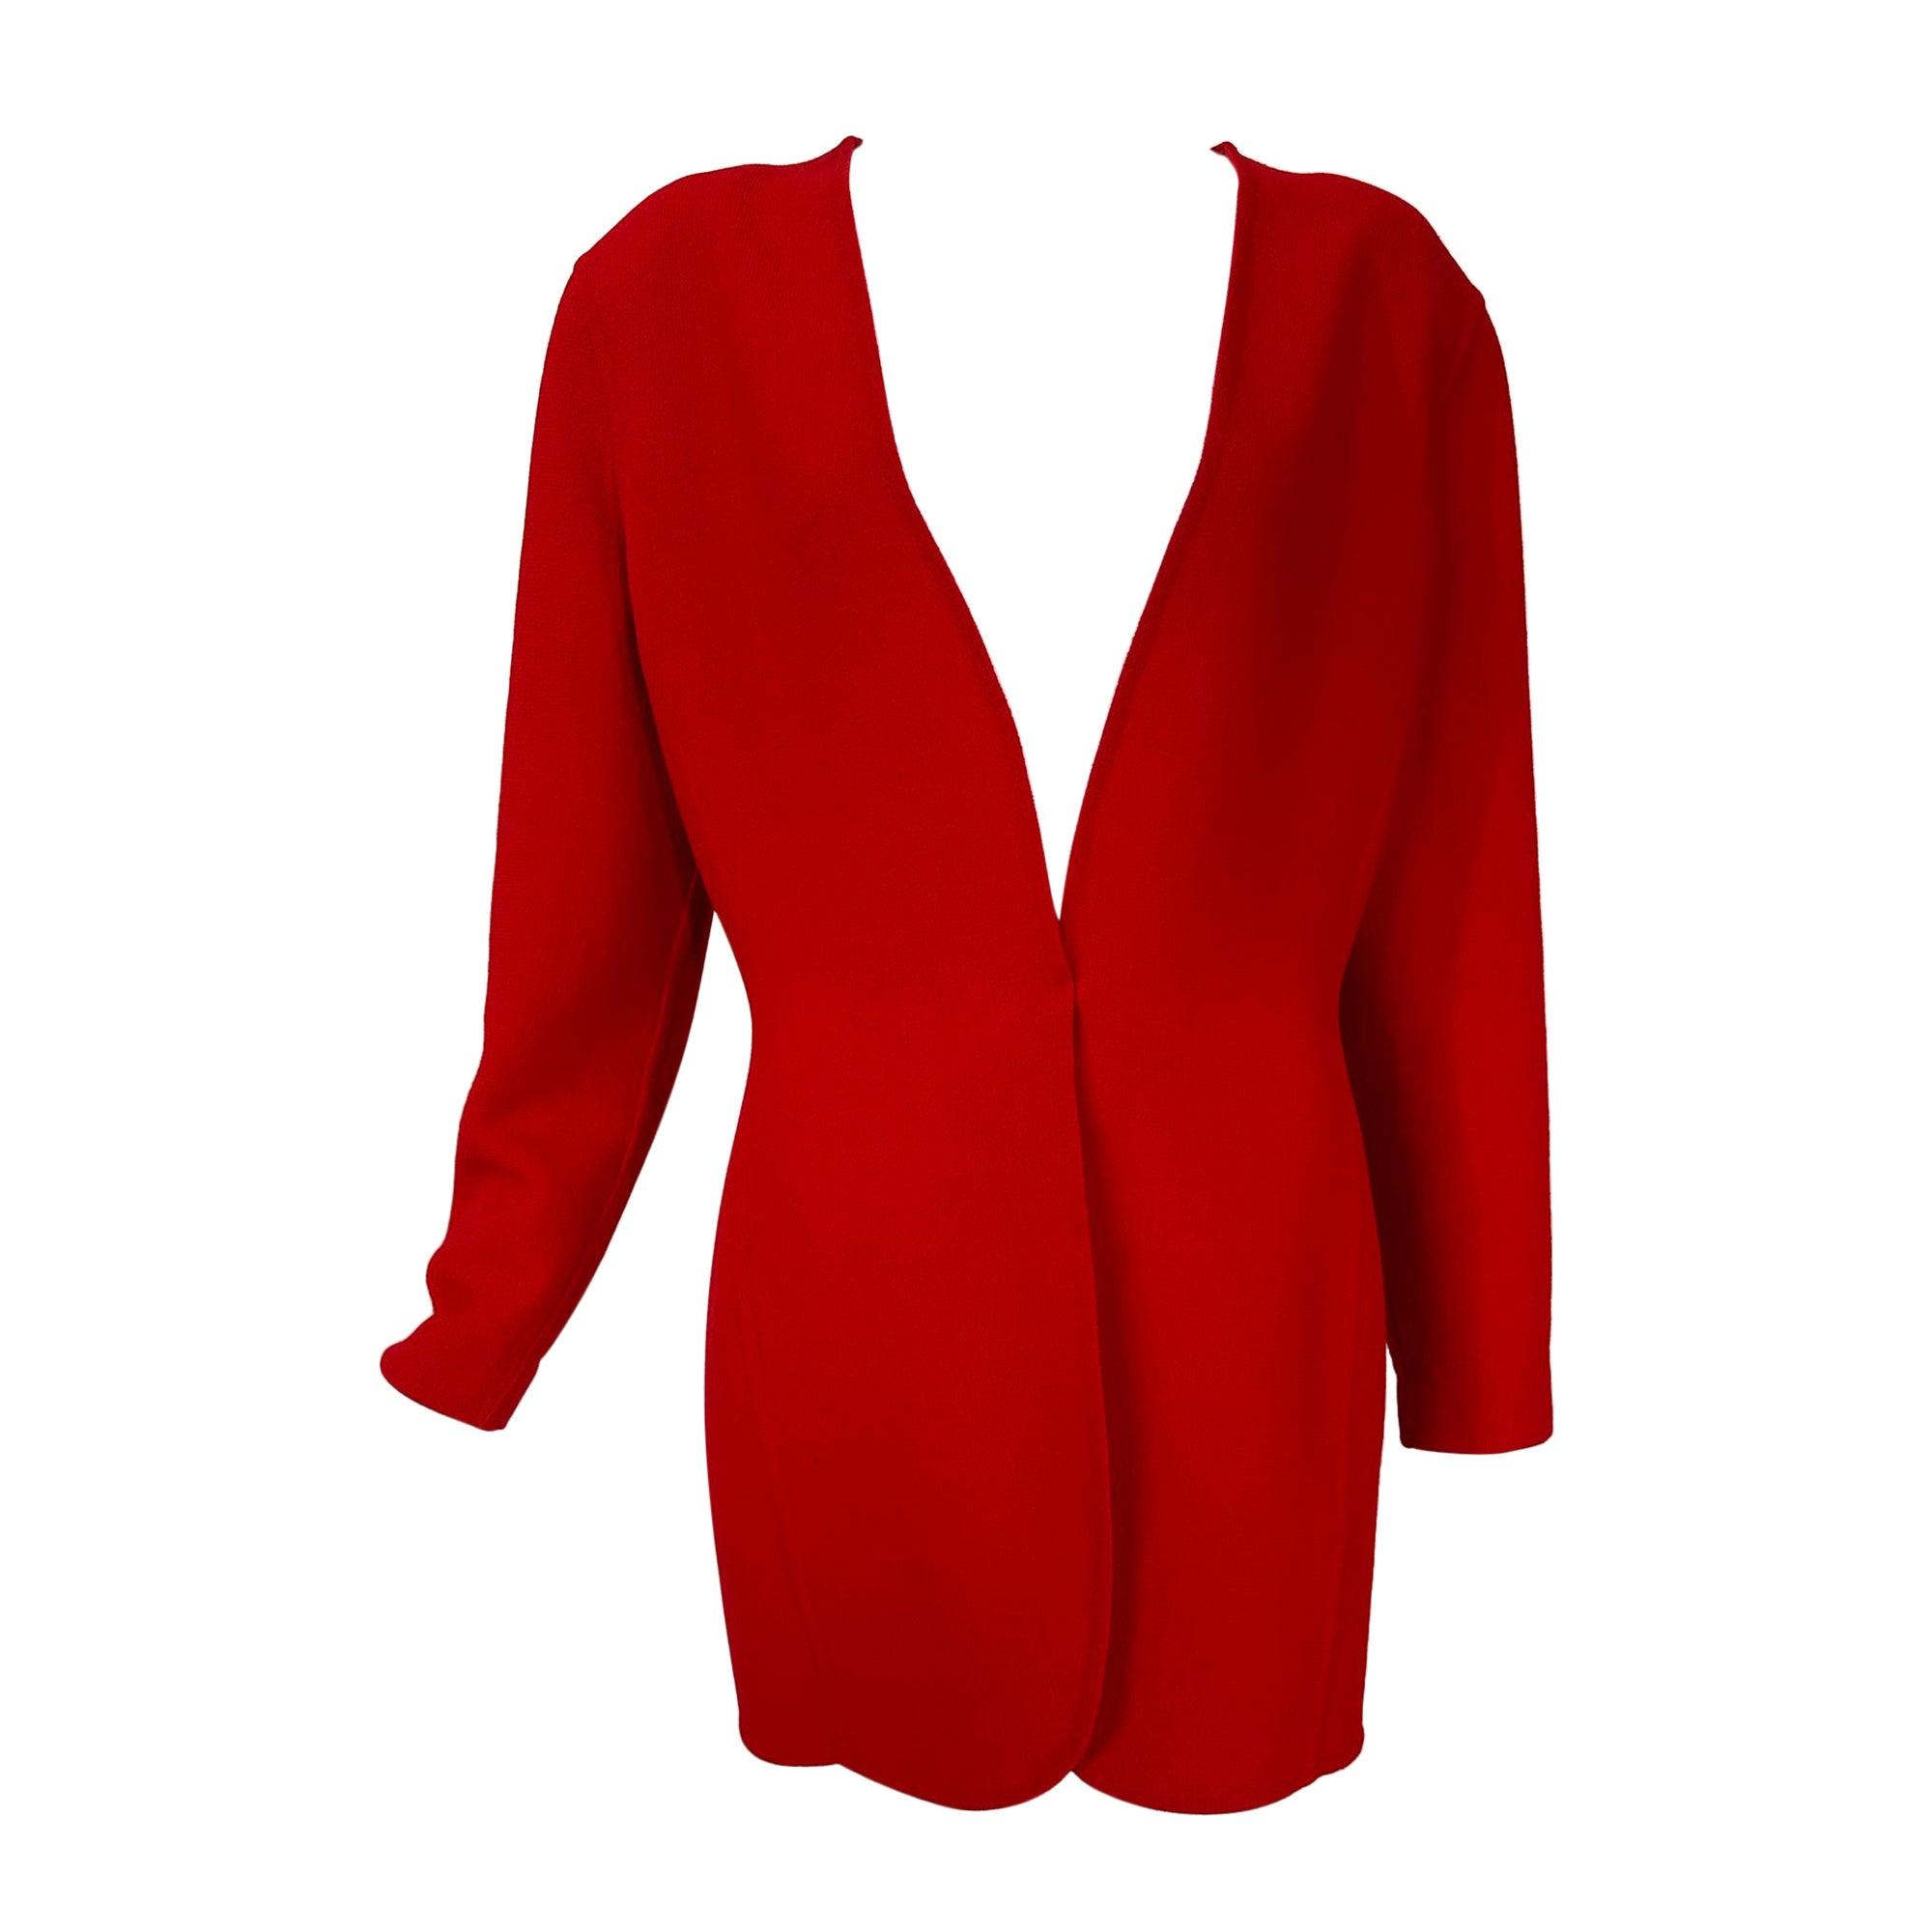 Donna Karan Black Label Fire Engine Red Double Face Wool Jacket